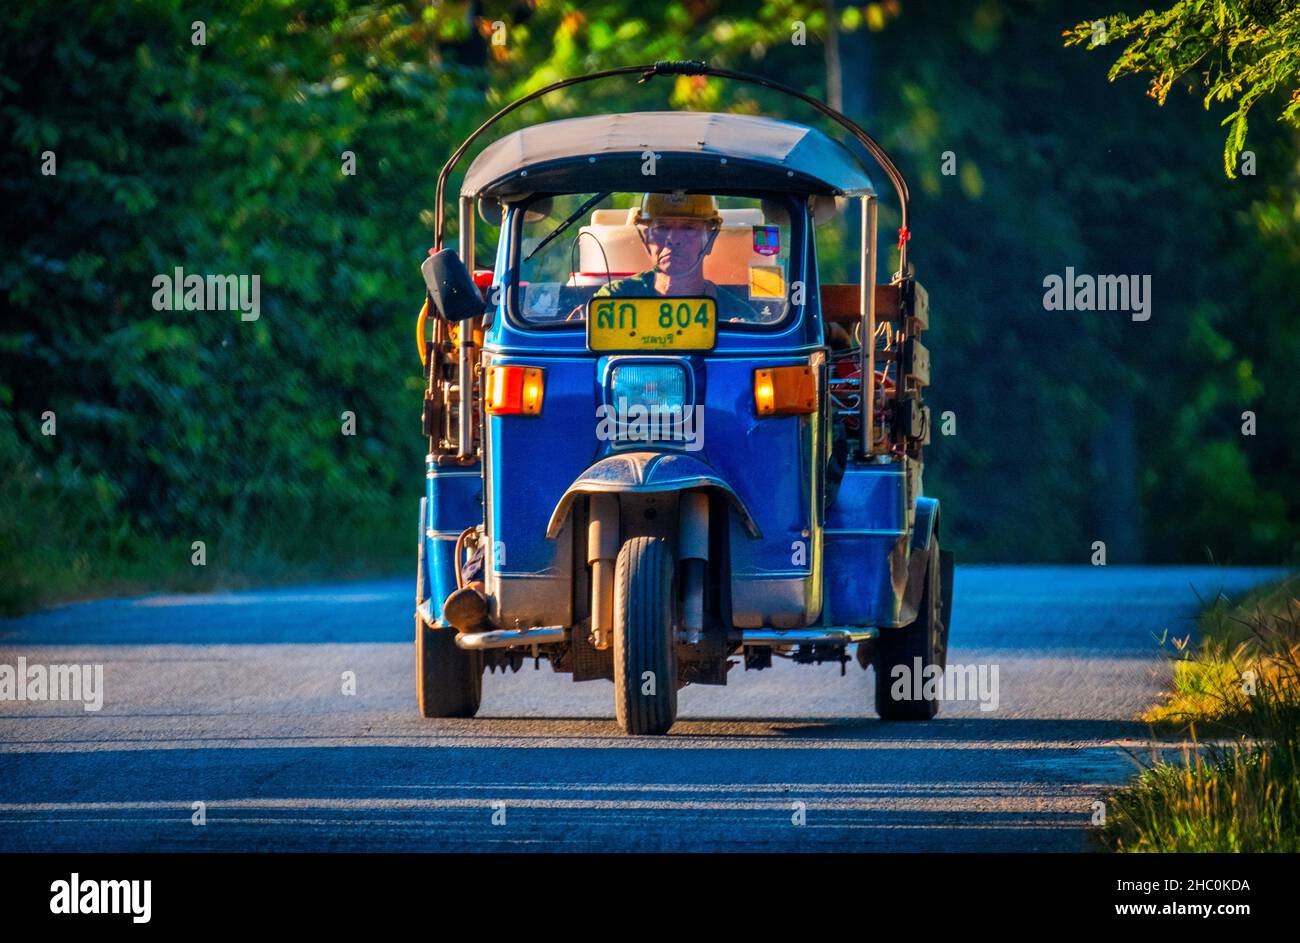 A Morning Commute in a Tiuk Tuk in Nakhon Nayok, Thailand. Stock Photo